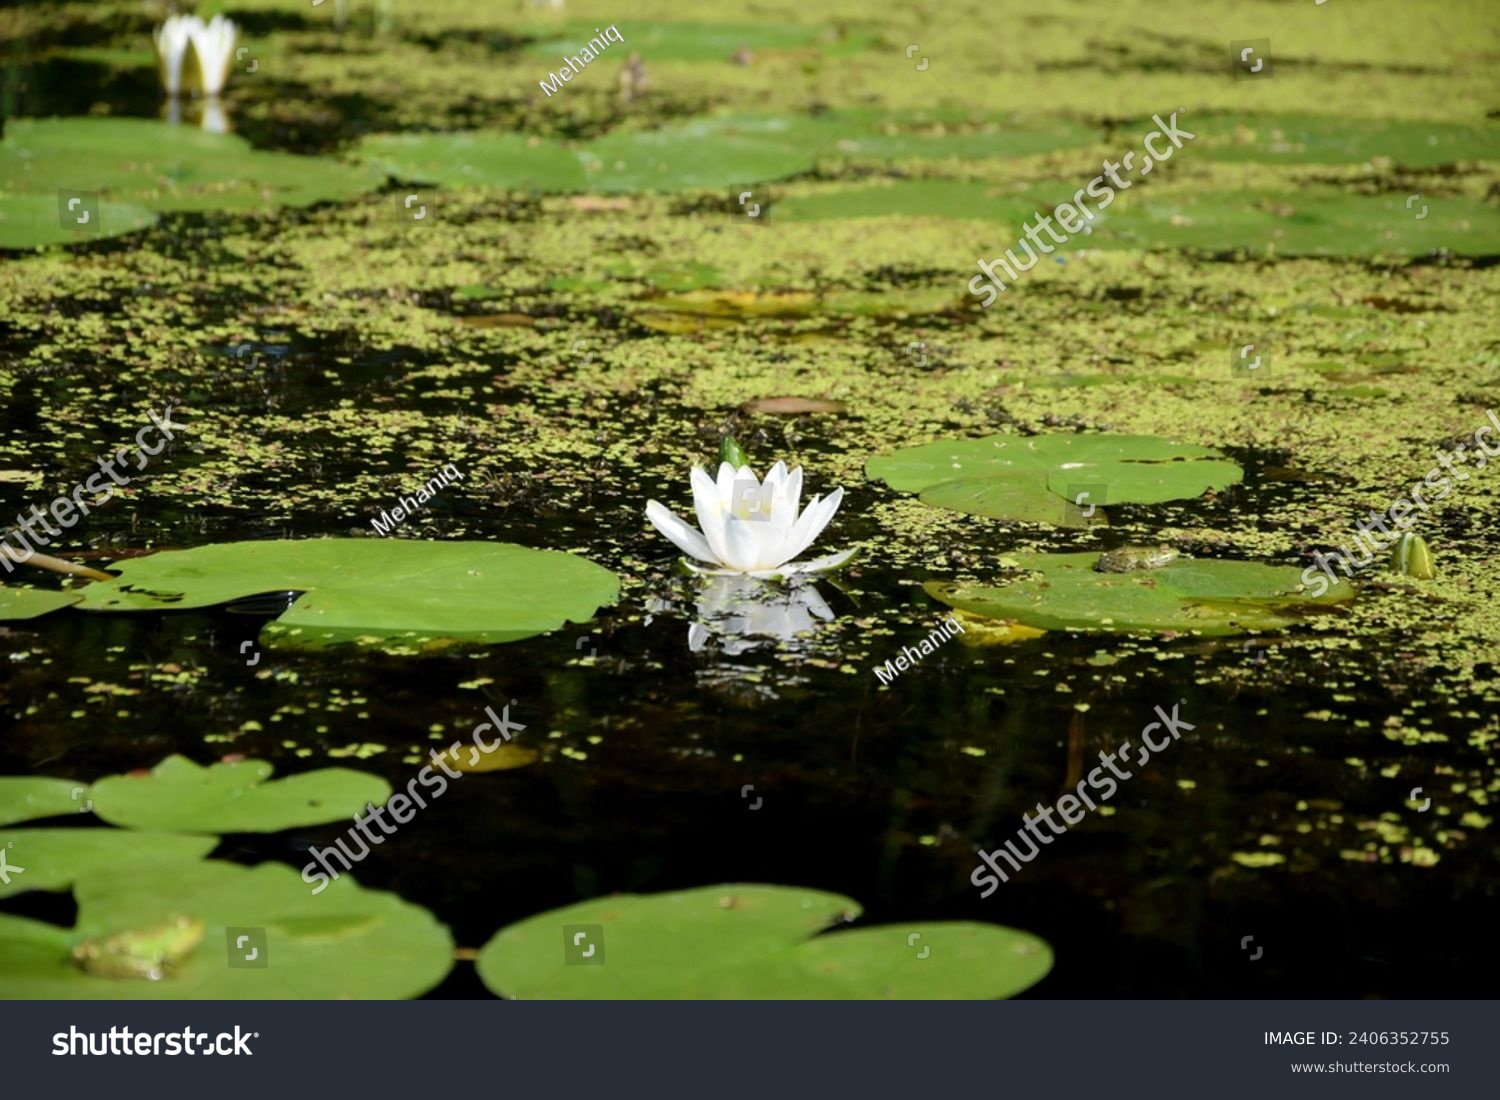 Beautiful white lotus flower and lily round leaves on the water after rain in river close up #2406352755